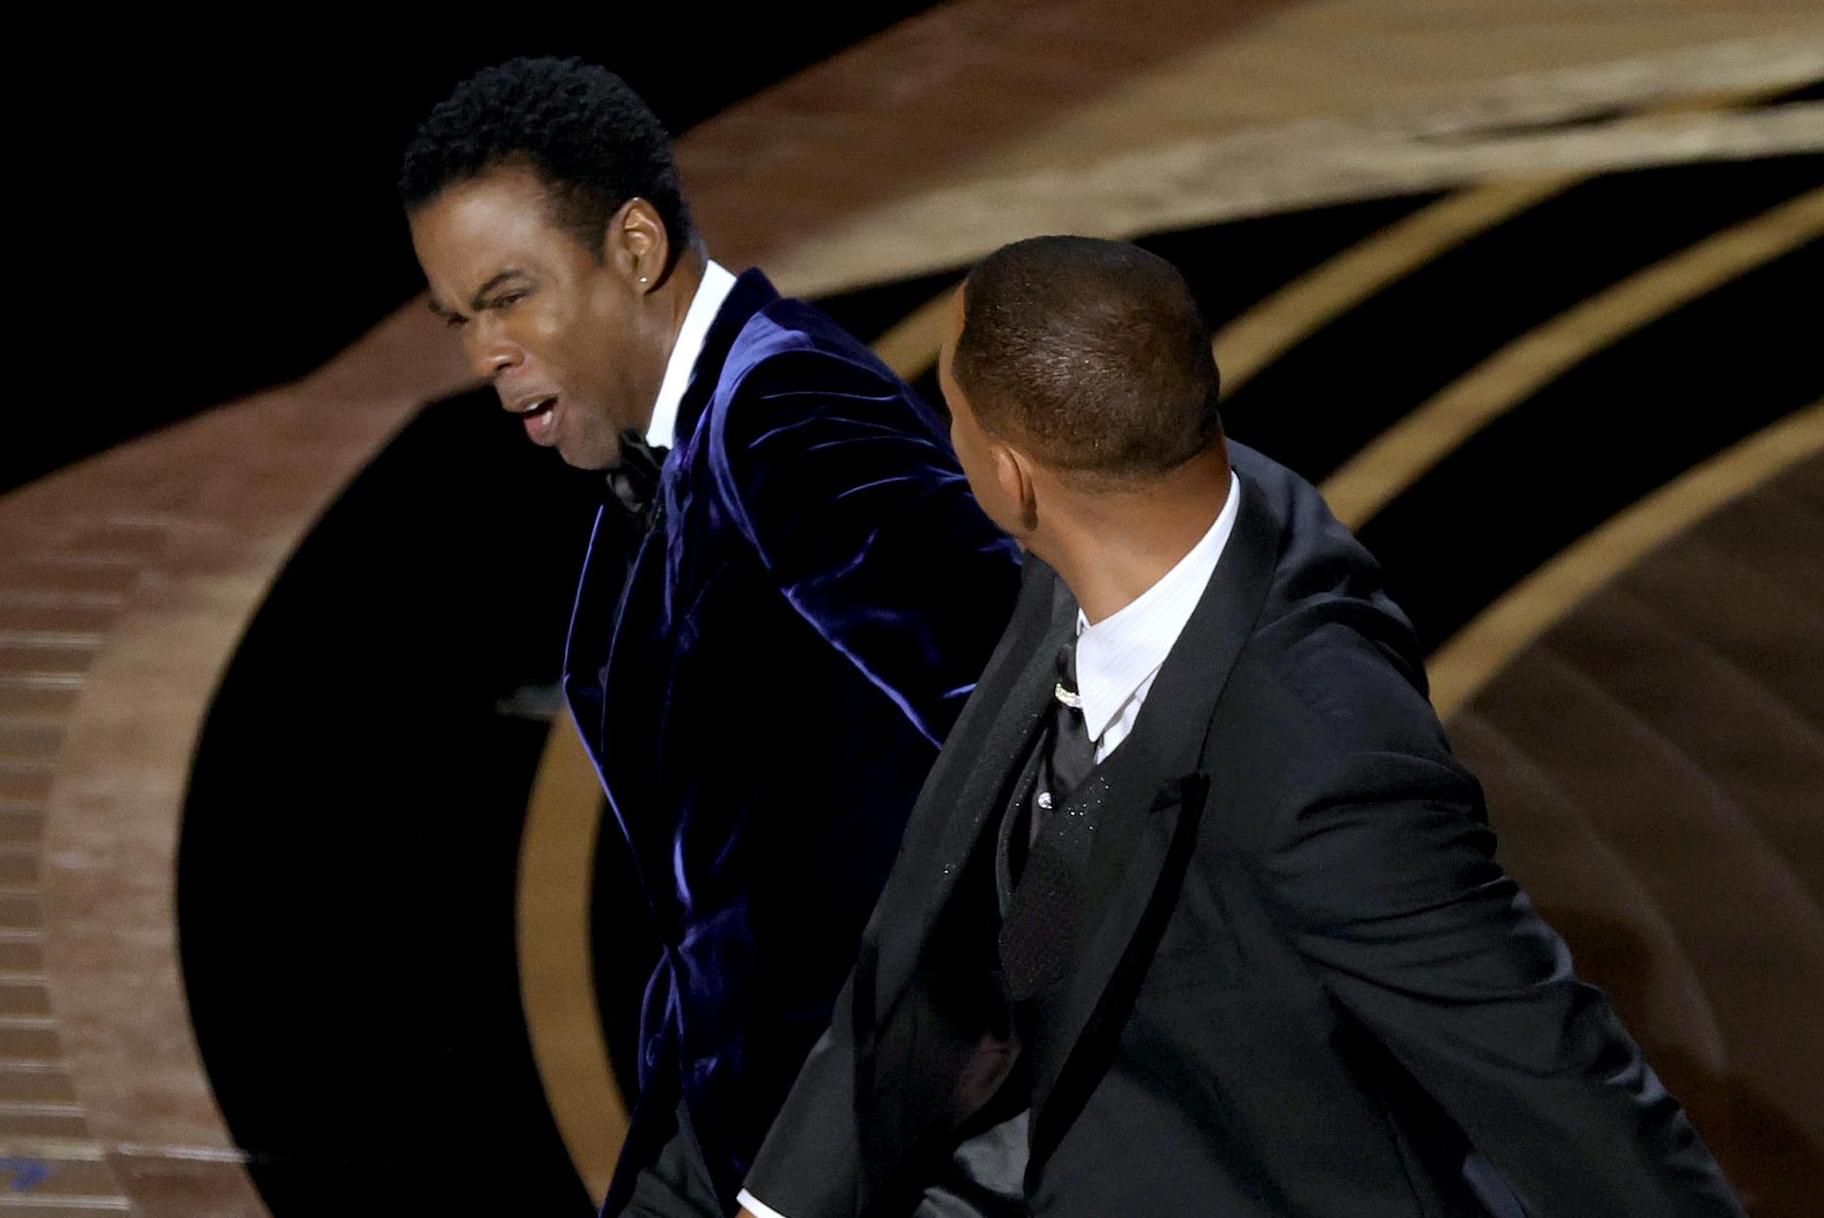 Will Smith slaps Chris Rock at the Academy Awards